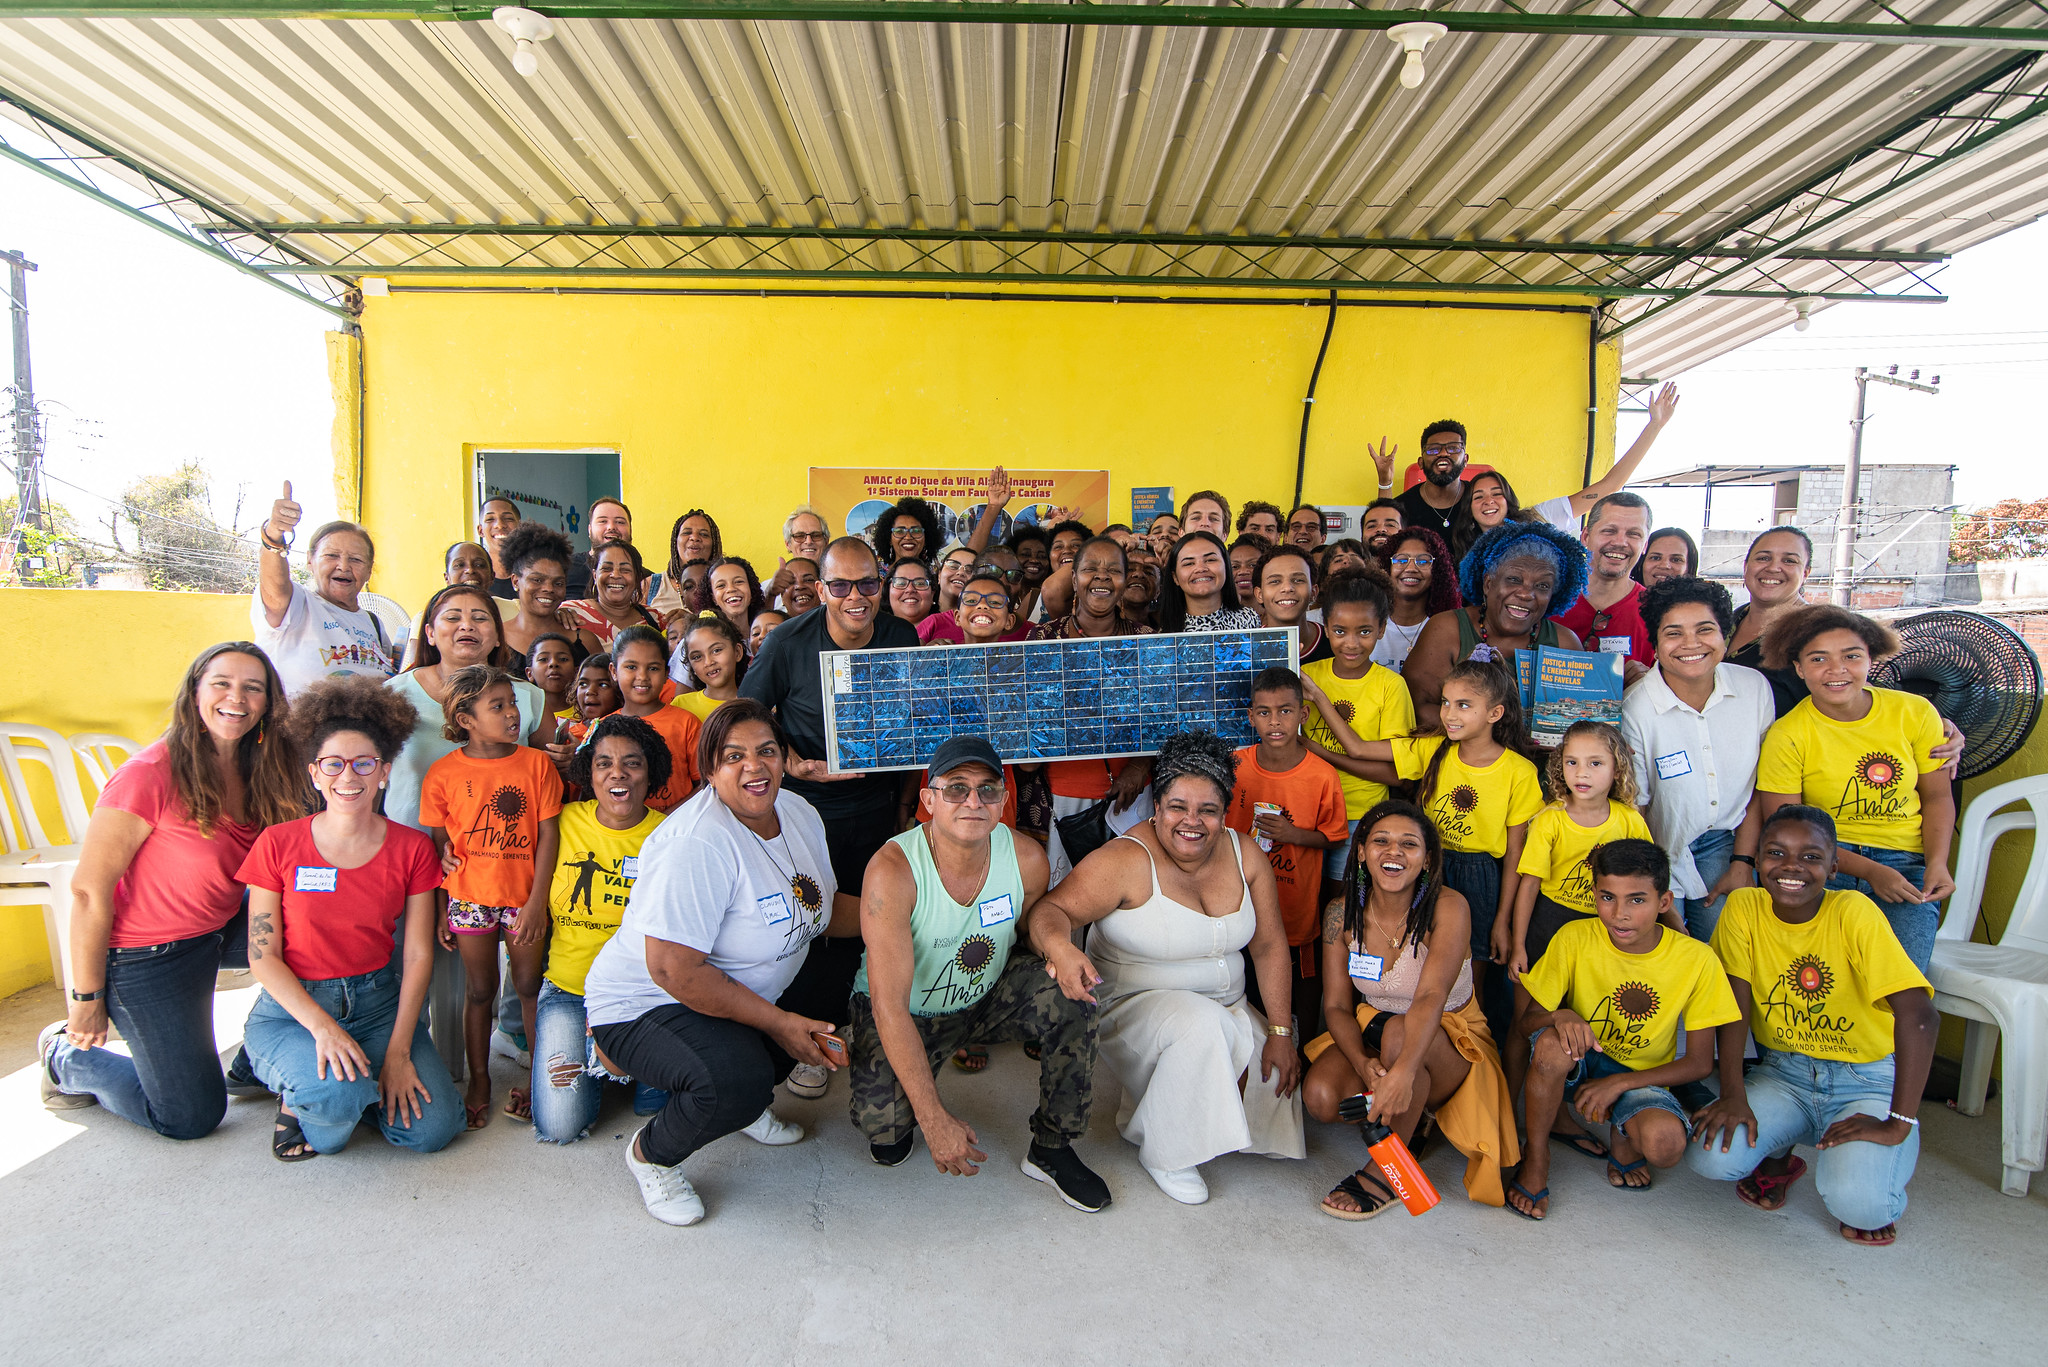 On Sunday, September 17, guests and community members celebrated the launch of the first solar energy system in the favelas of Duque de Caxias, Baixada Fluminense. The installation was spearheaded by the Association of Women With Attitude and Social Commitment (AMAC). Photo: Bárbara Dias